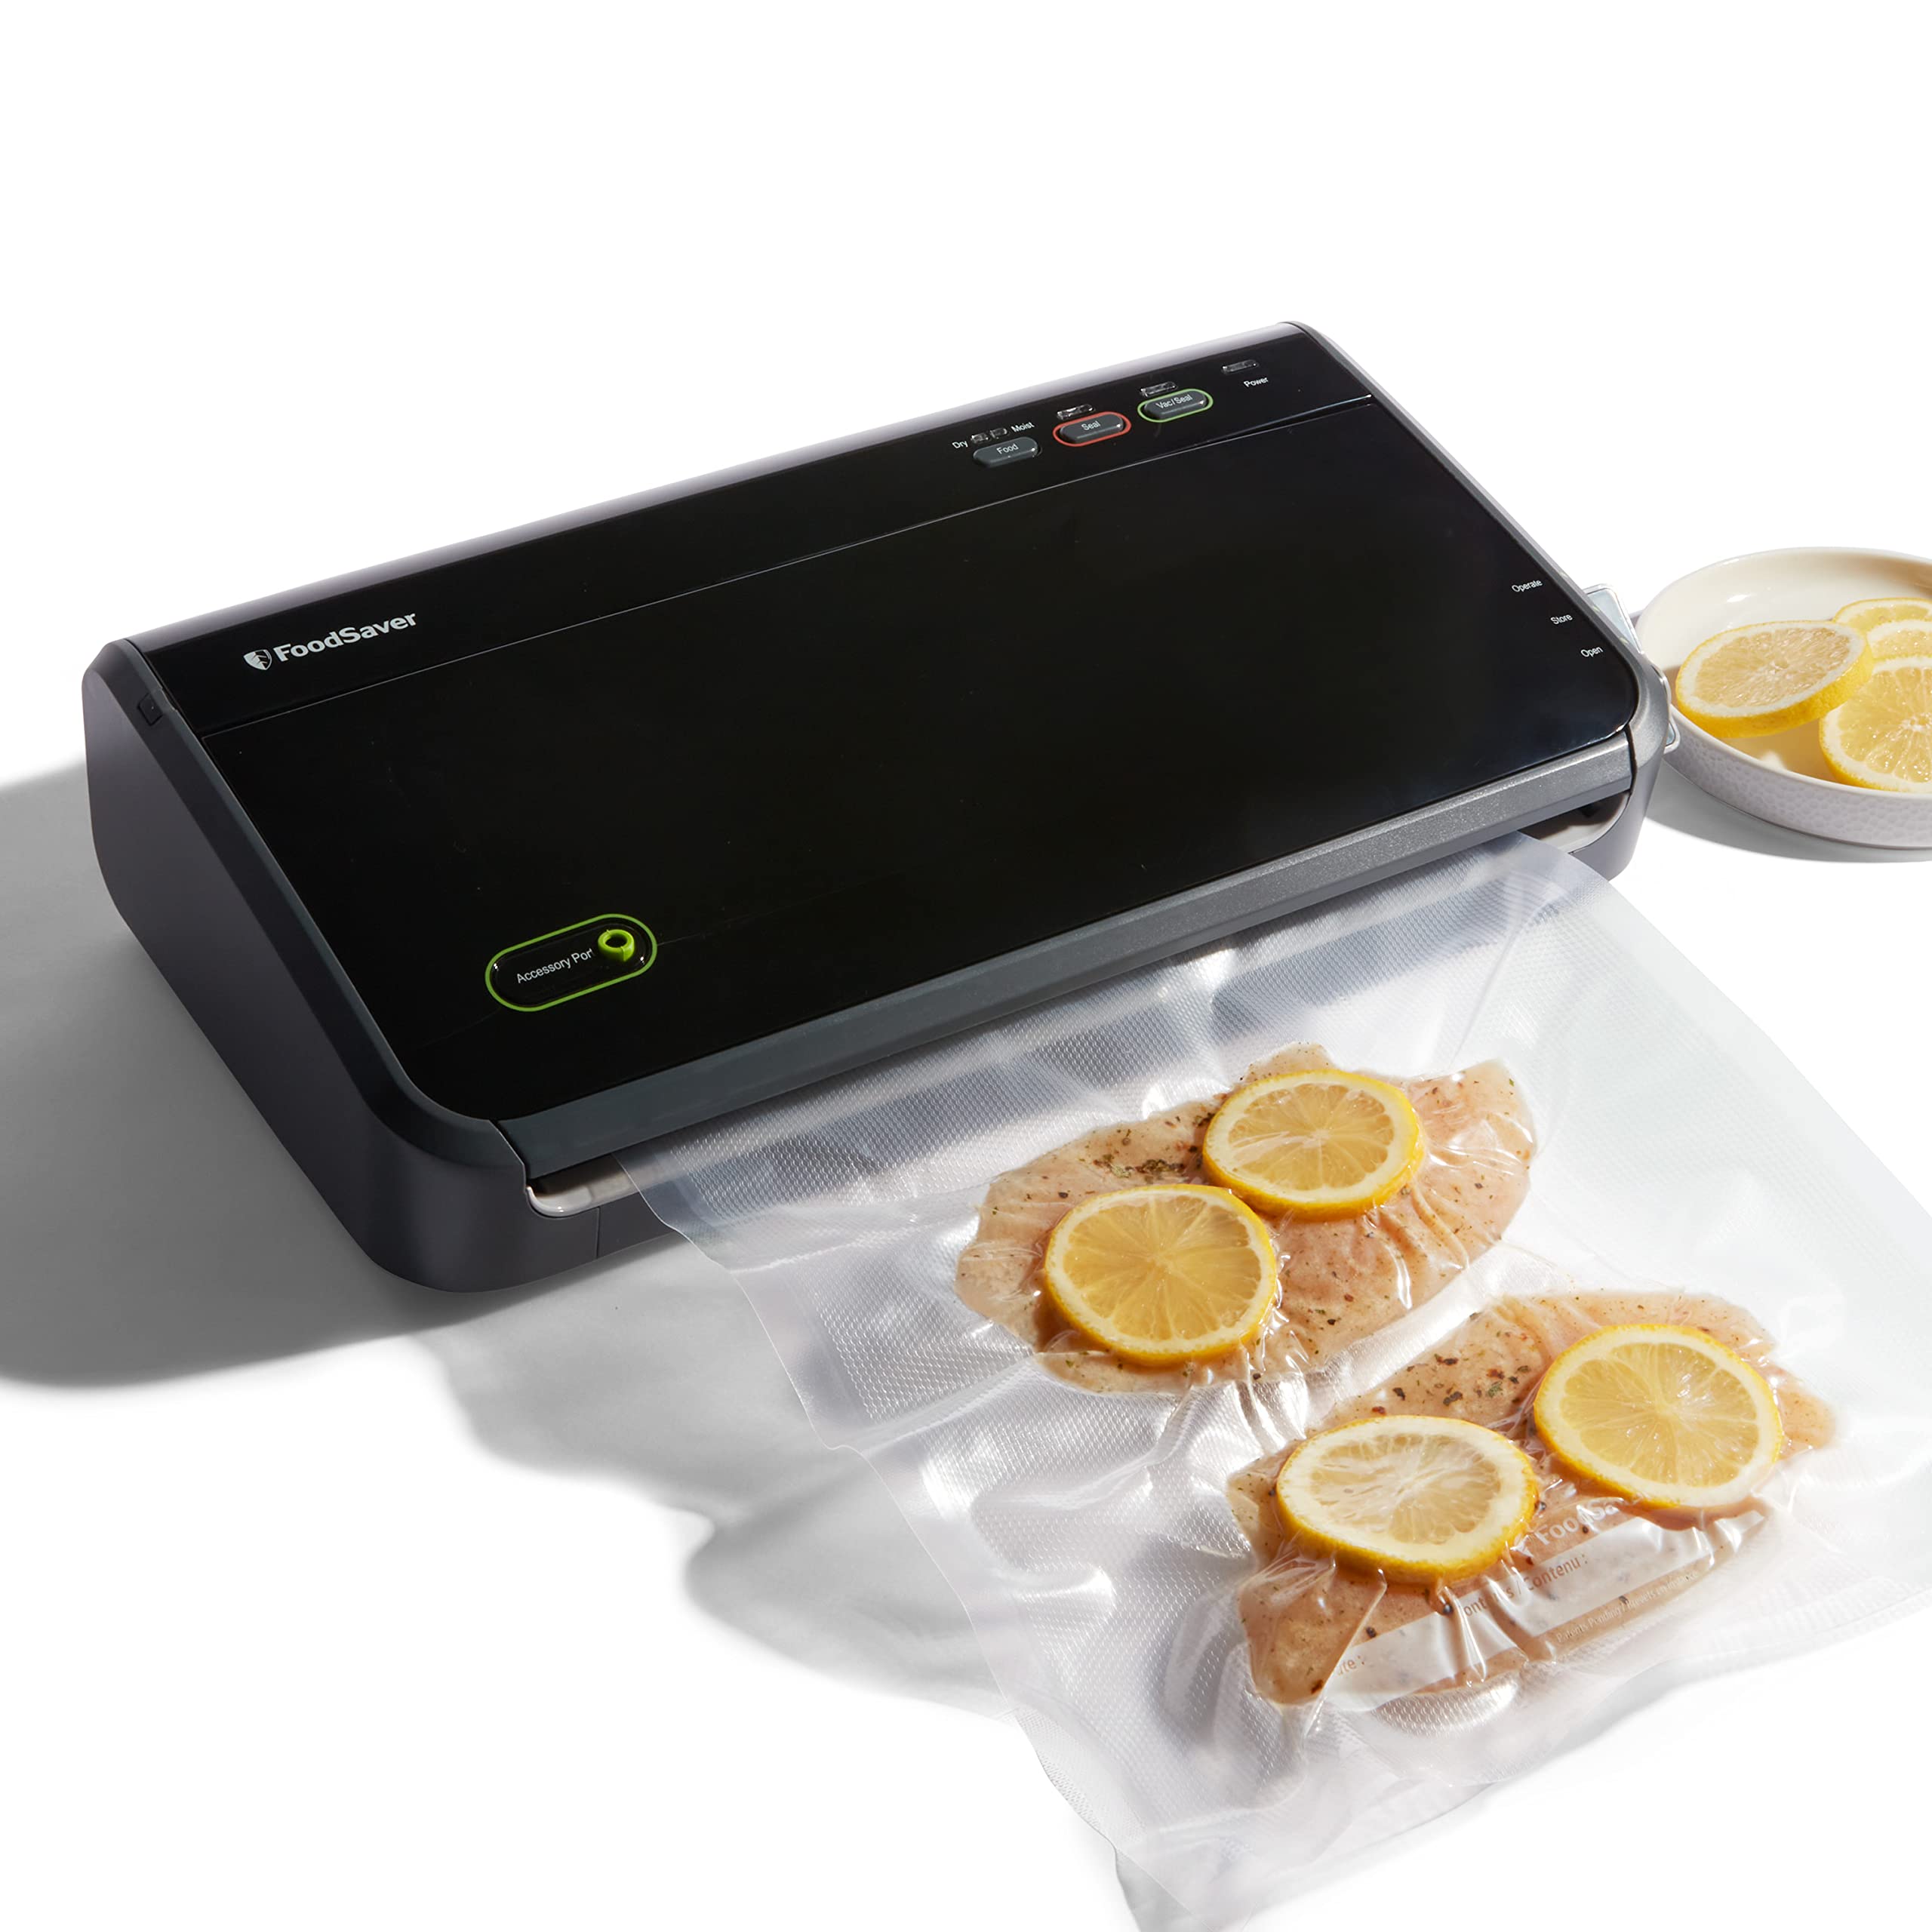 Foodsaver Space-Saving Vacuum Sealer with Bags and Roll, Silver